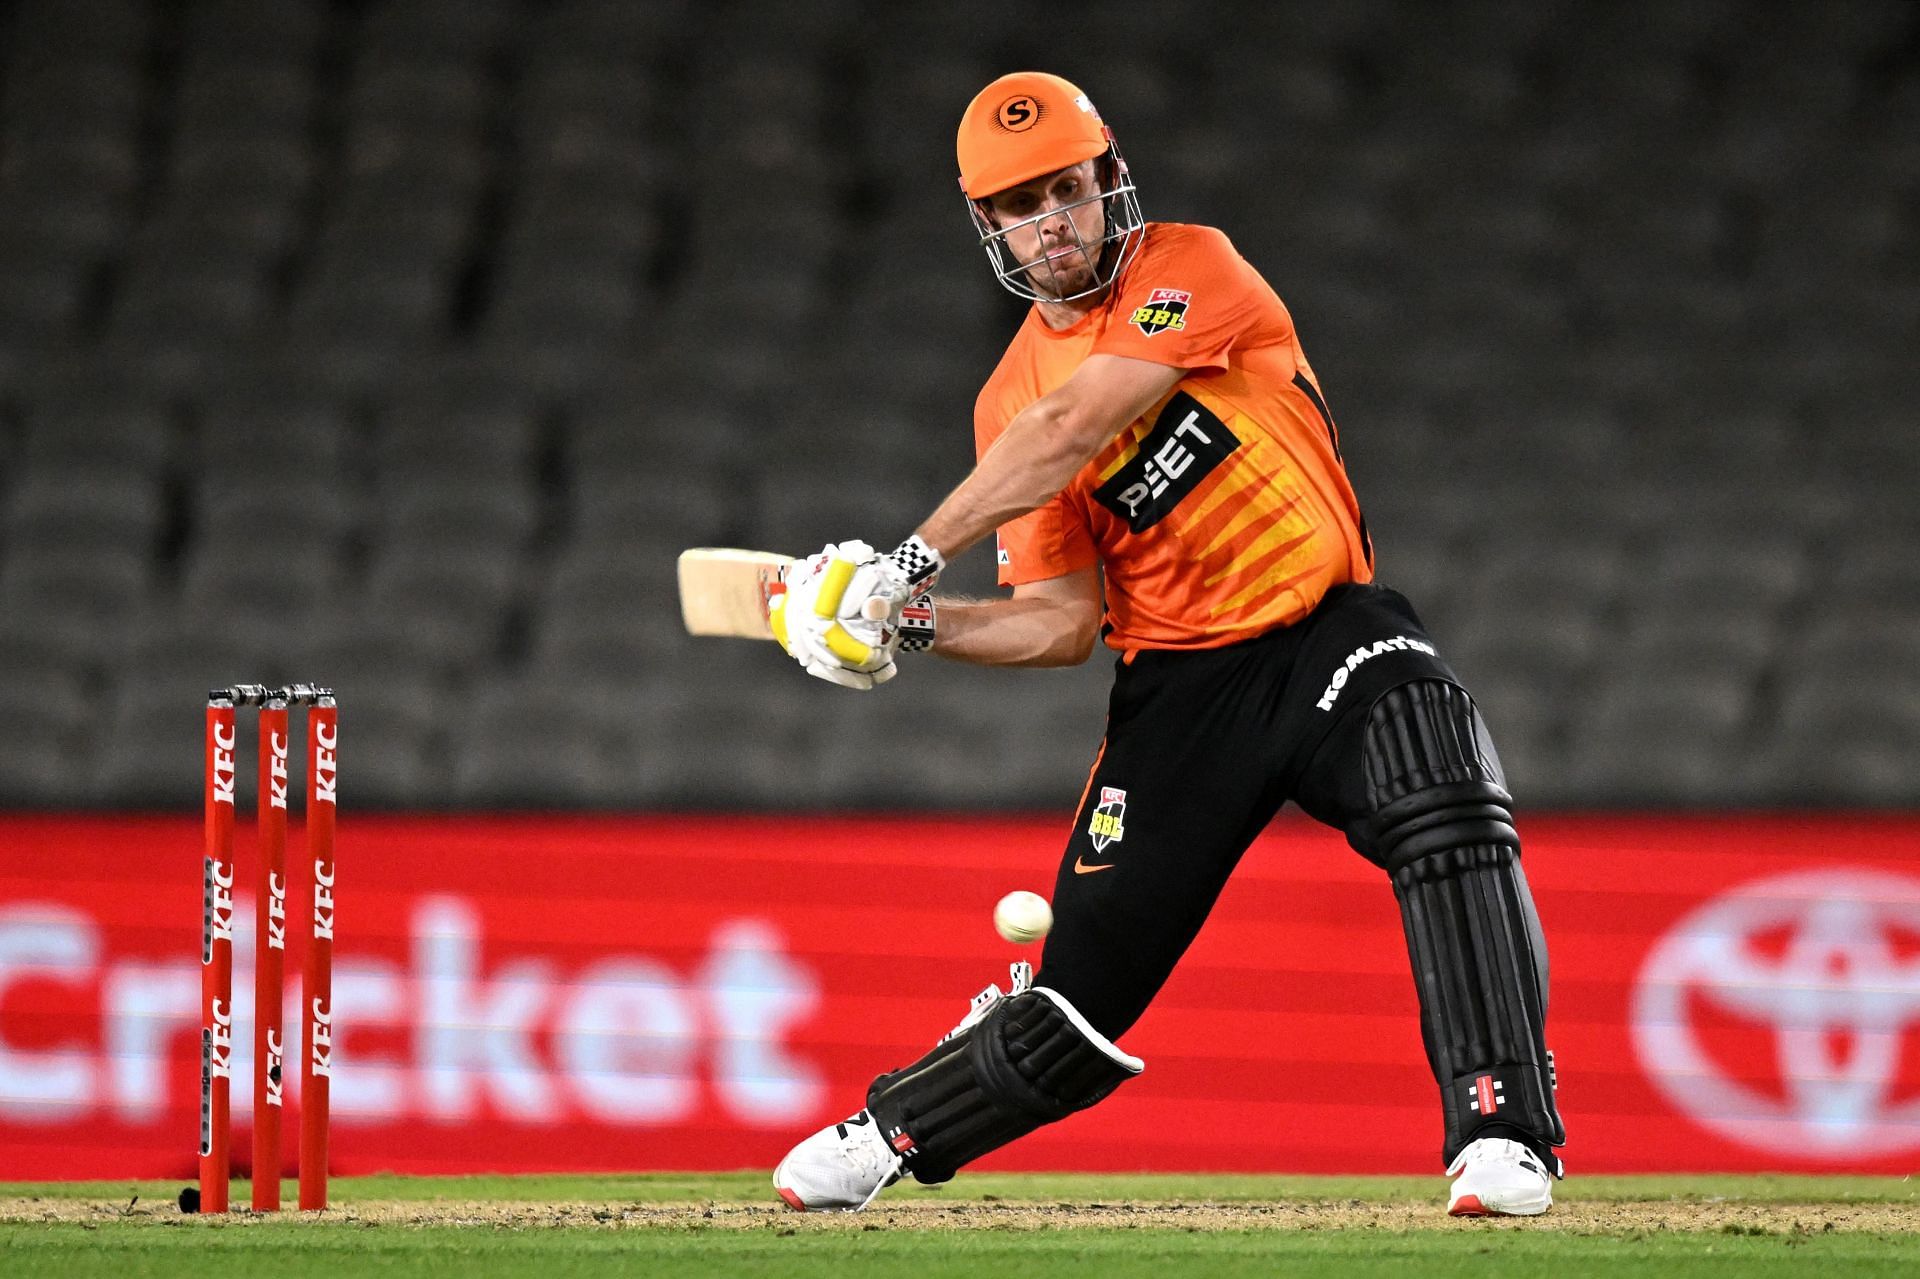 Mitchell Marsh has been in scorching form ahead of the IPL 2022 Auction.